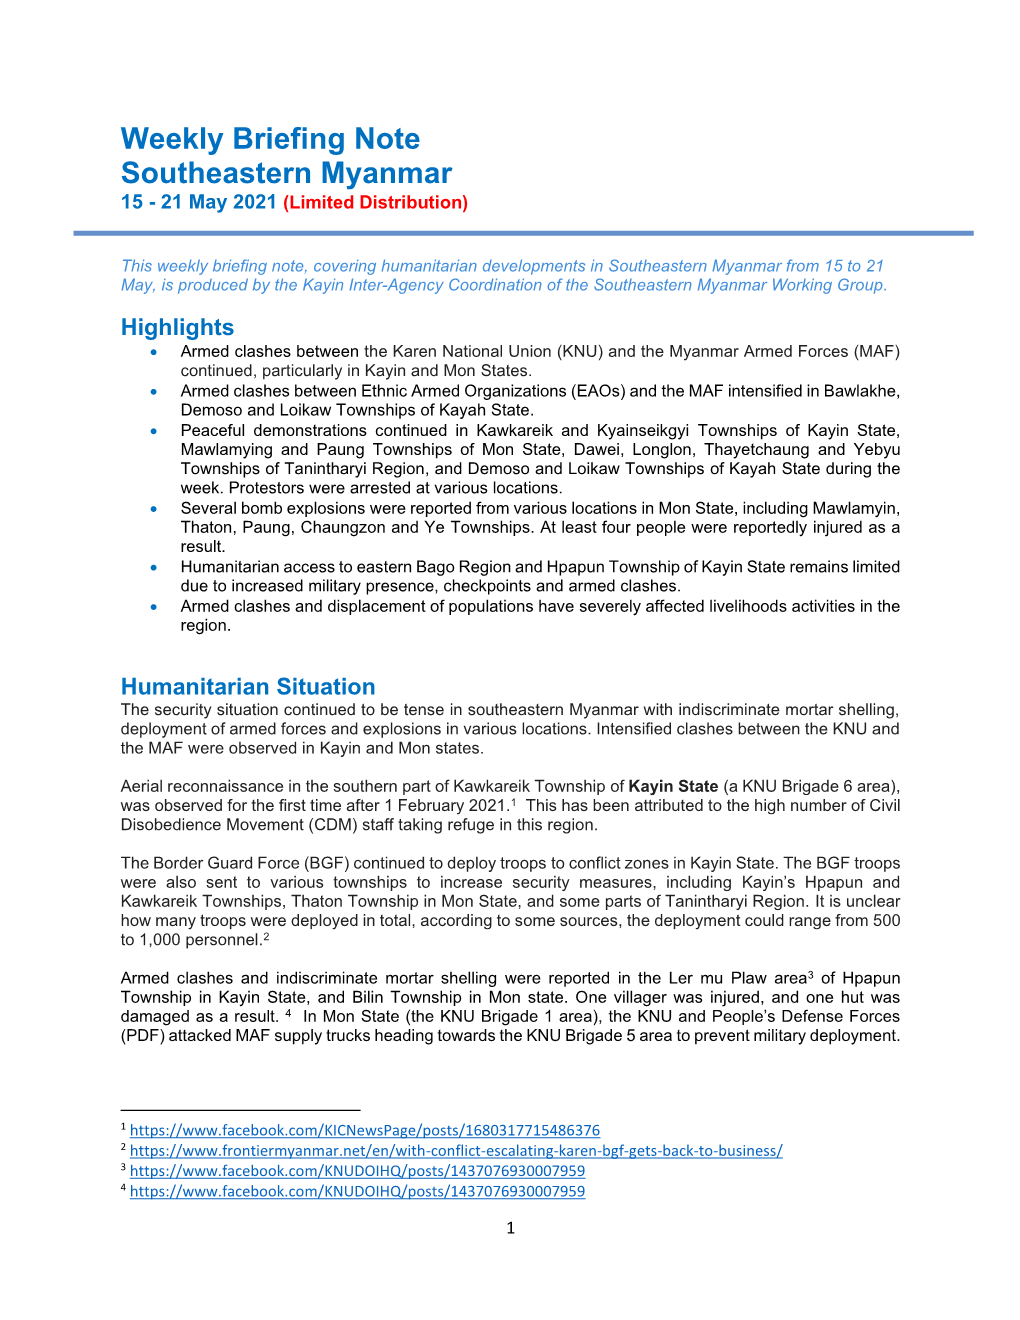 Weekly Briefing Note Southeastern Myanmar 15 - 21 May 2021 (Limited Distribution)